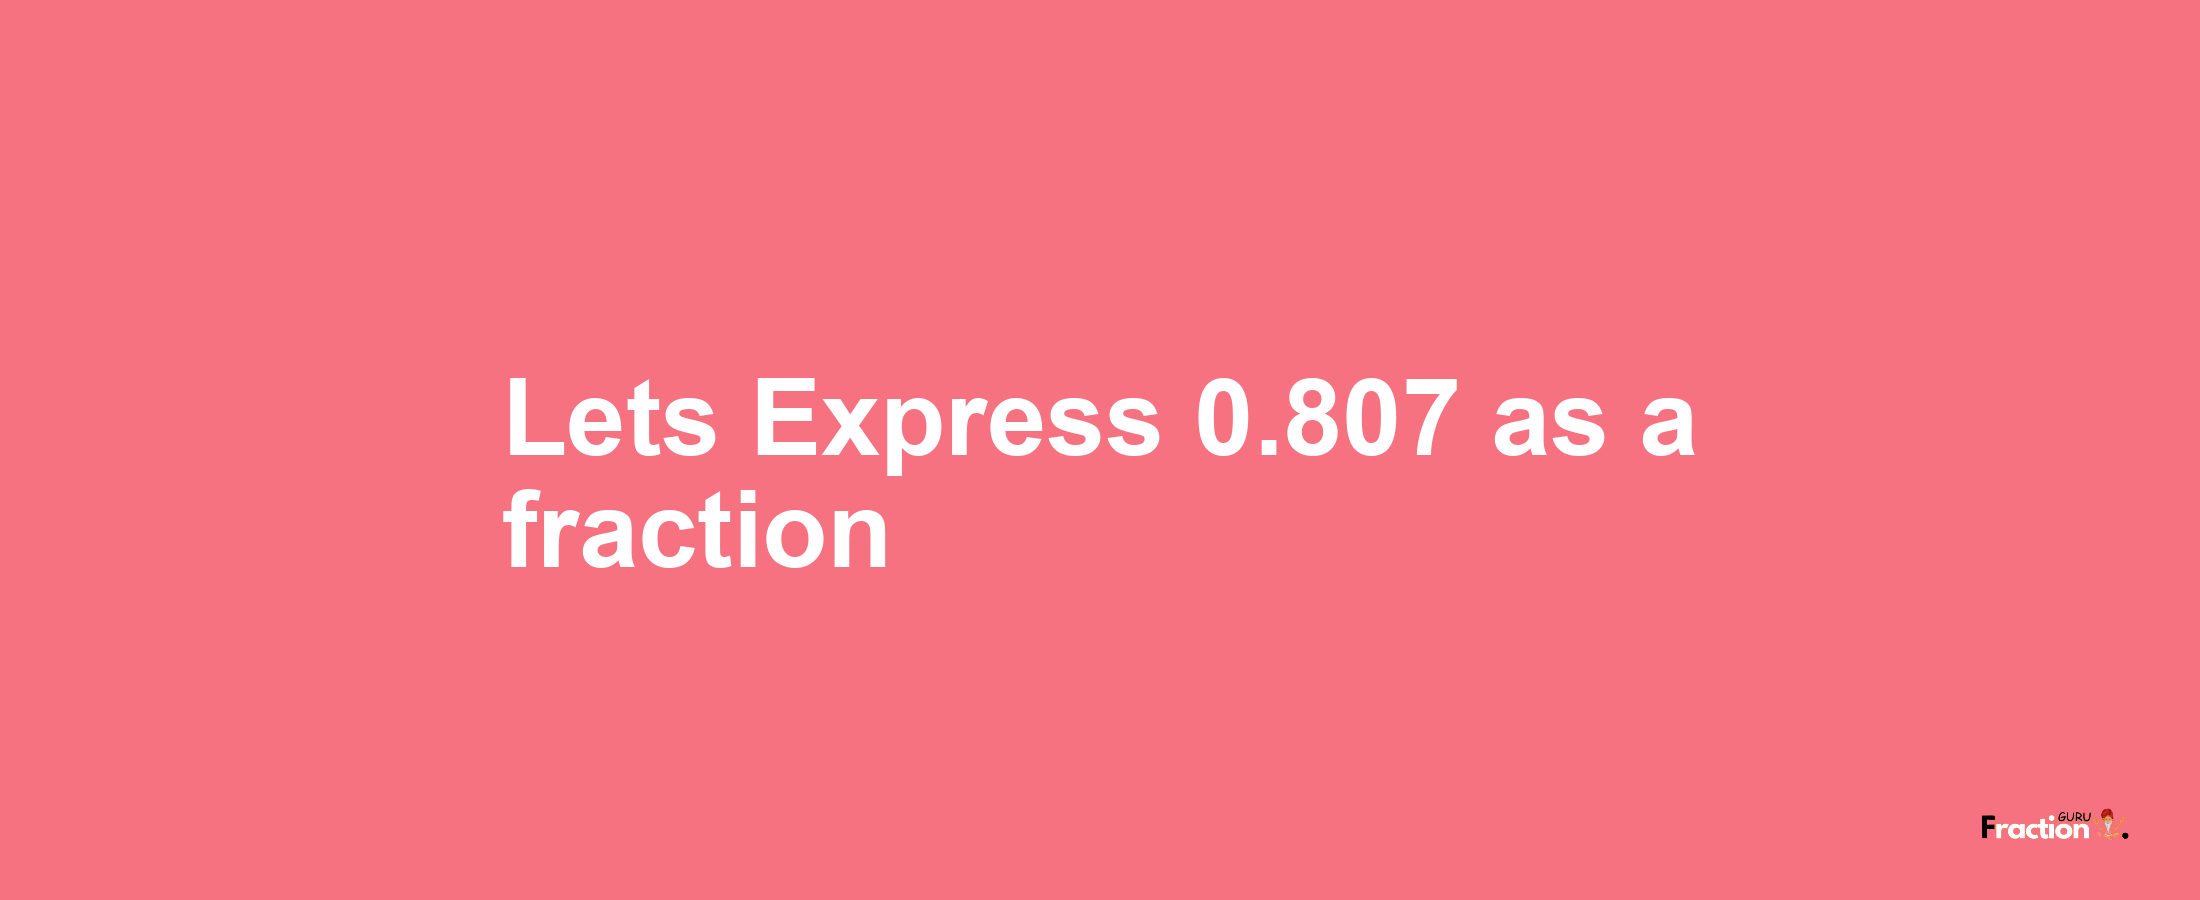 Lets Express 0.807 as afraction